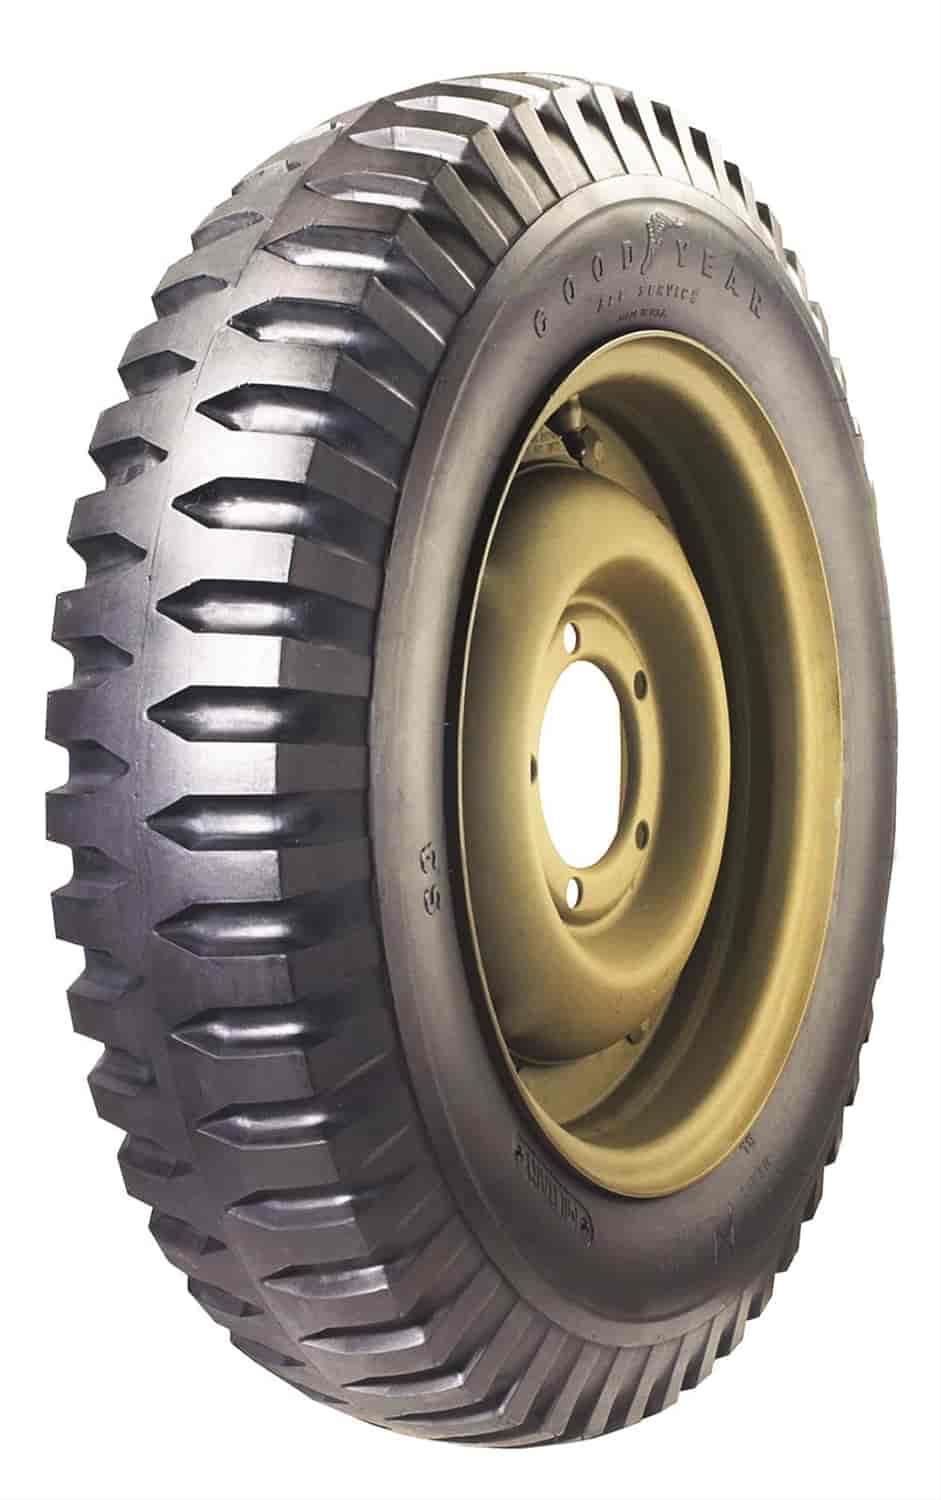 Goodyear Collector Series NDT Military Tire